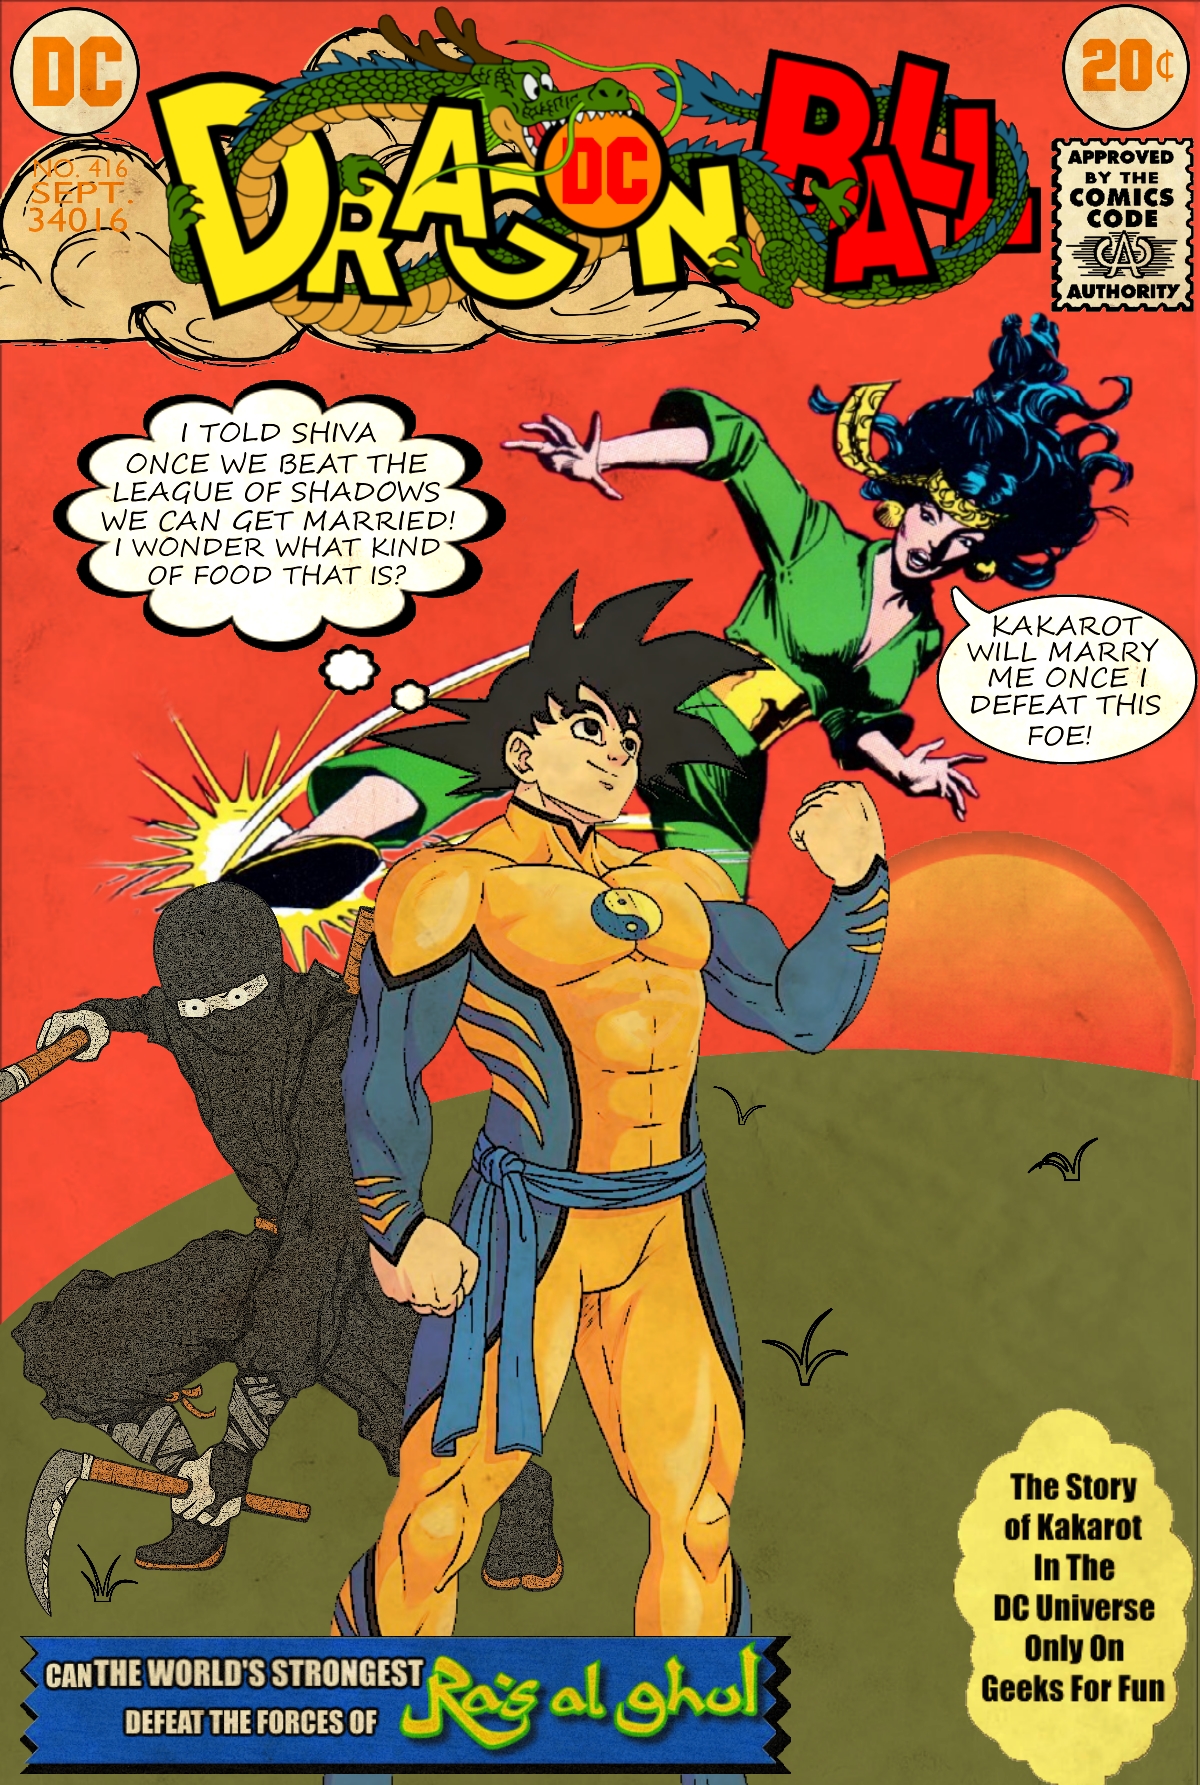 Dragon Ball DC #416 Silver Age Cover by Sydpart2 on DeviantArt